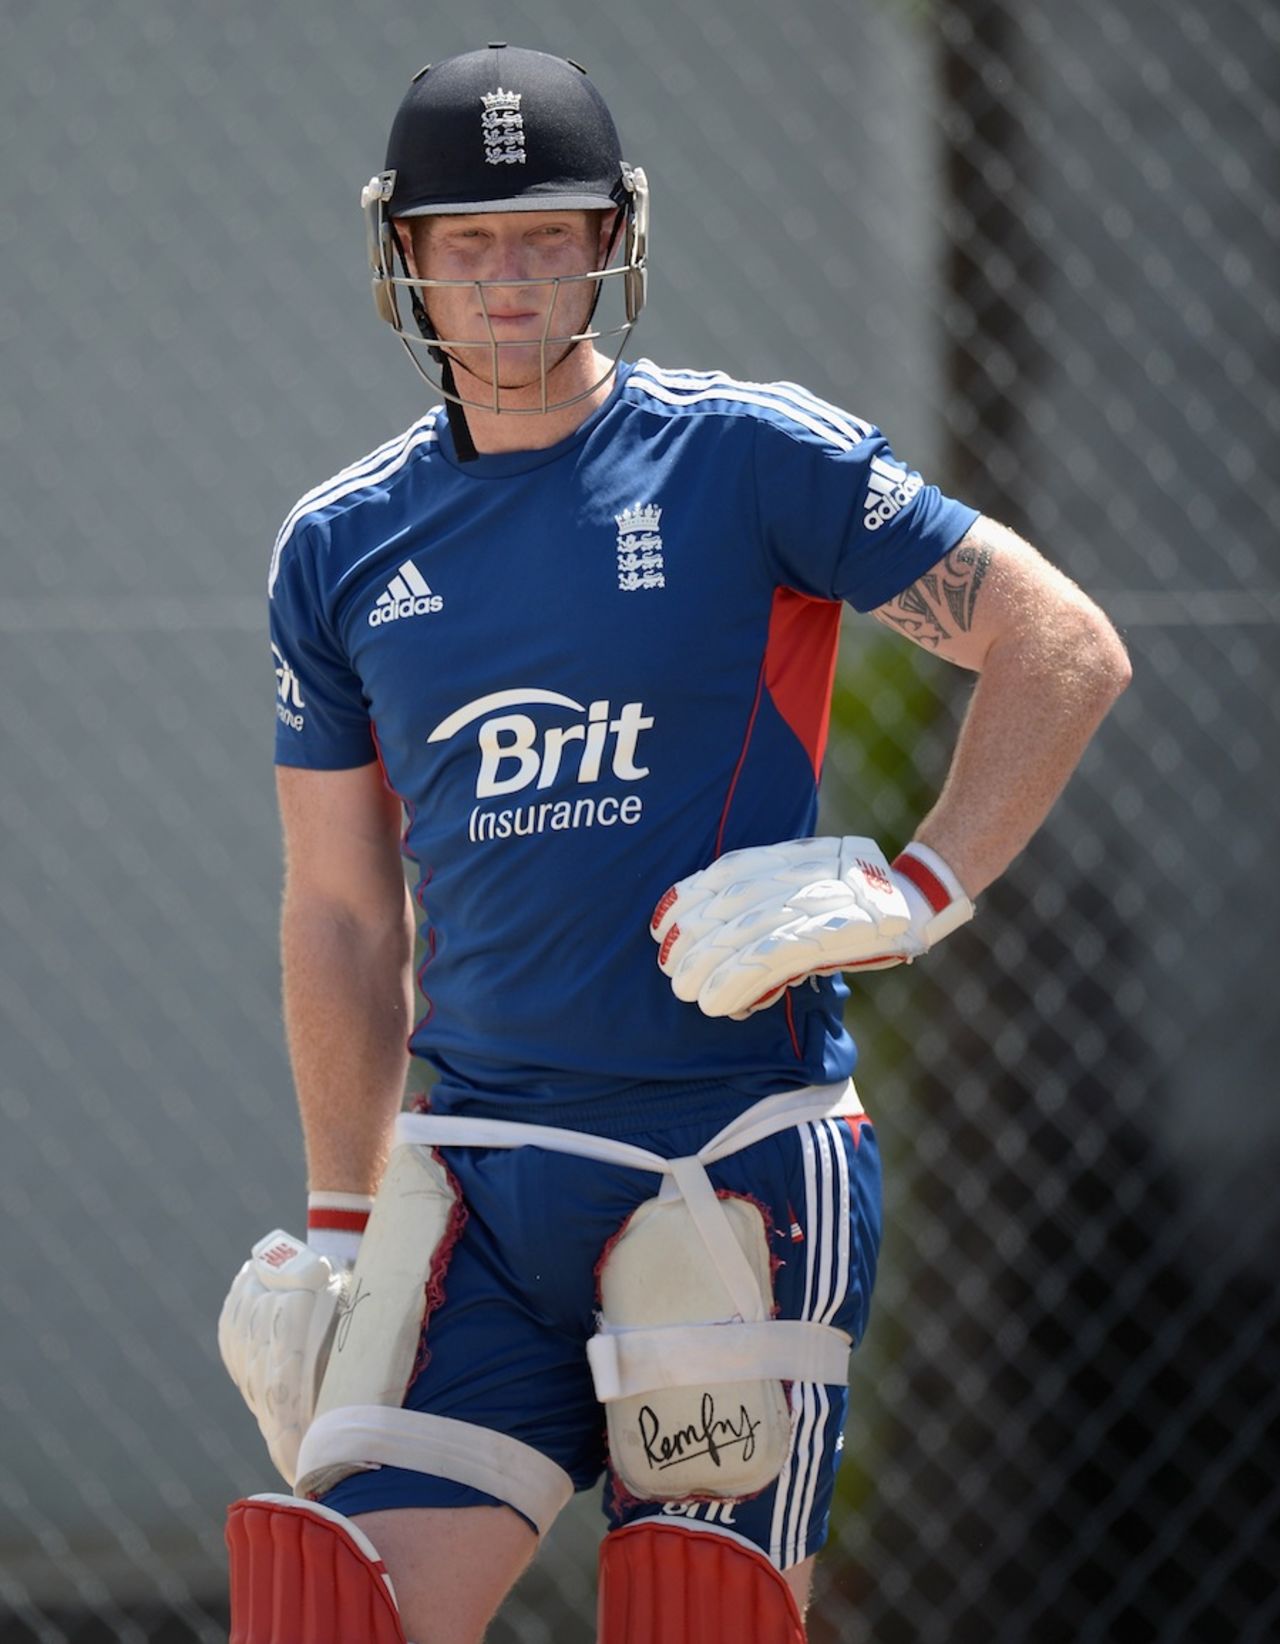 Ben Stokes awaits his chance to bat in the nets, Bridgetown, March 12, 2014